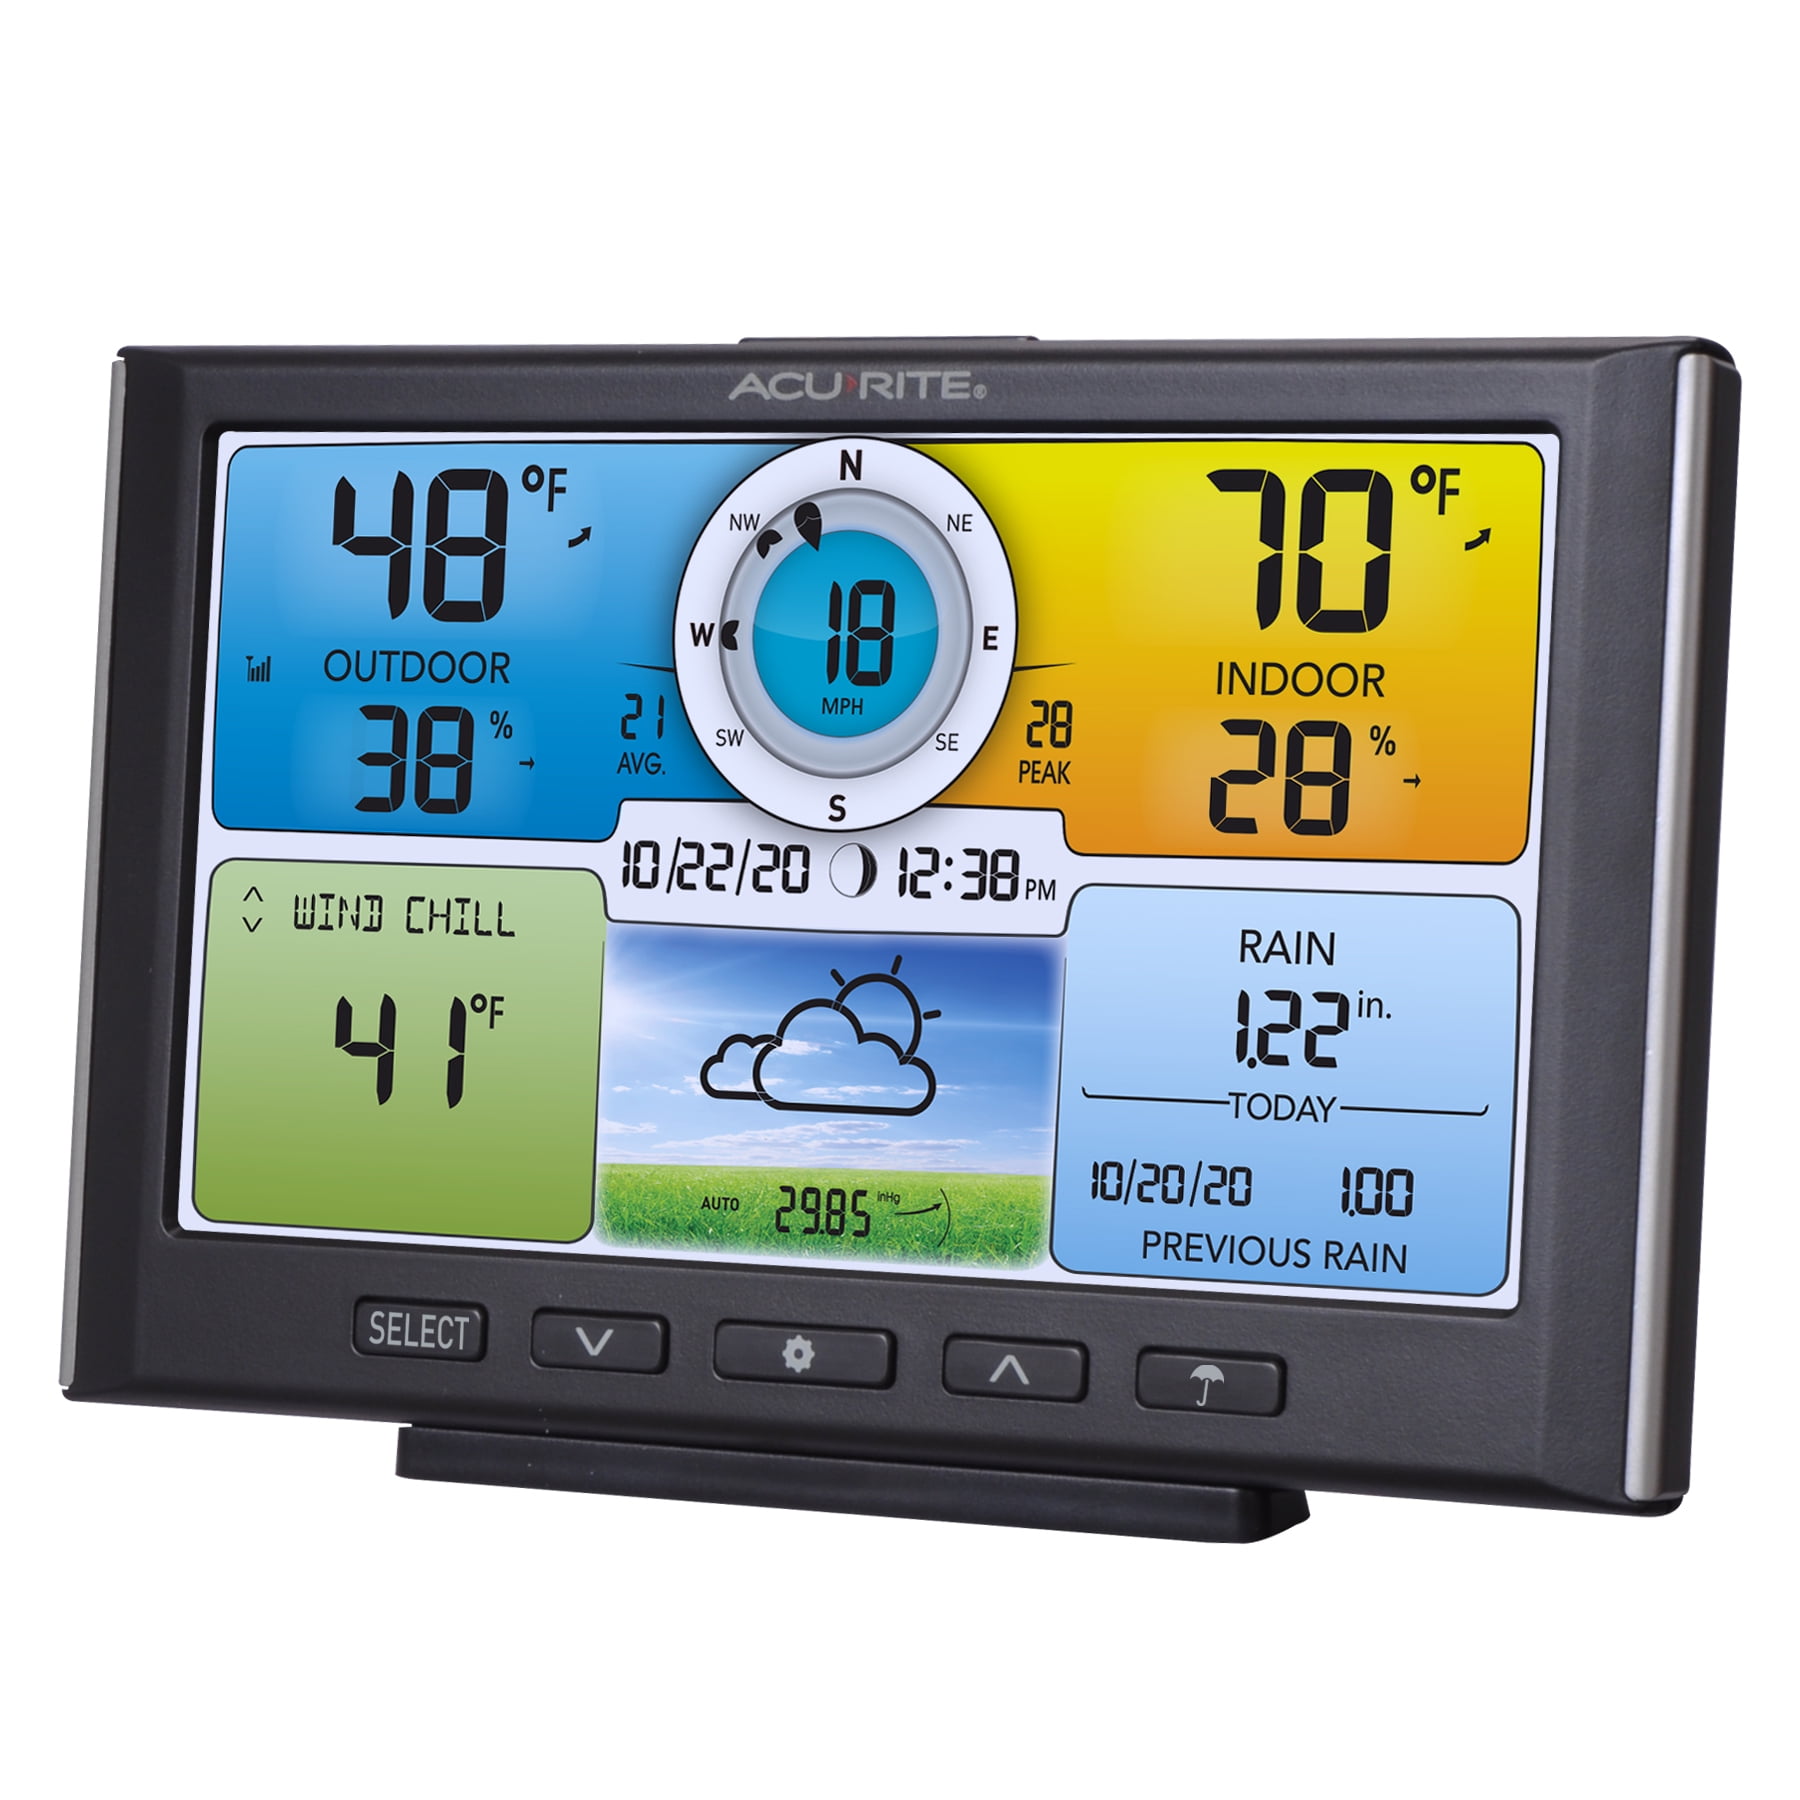 AcuRite Iris 5-in-1 Home Weather Station with Wi-Fi Connection to Weather